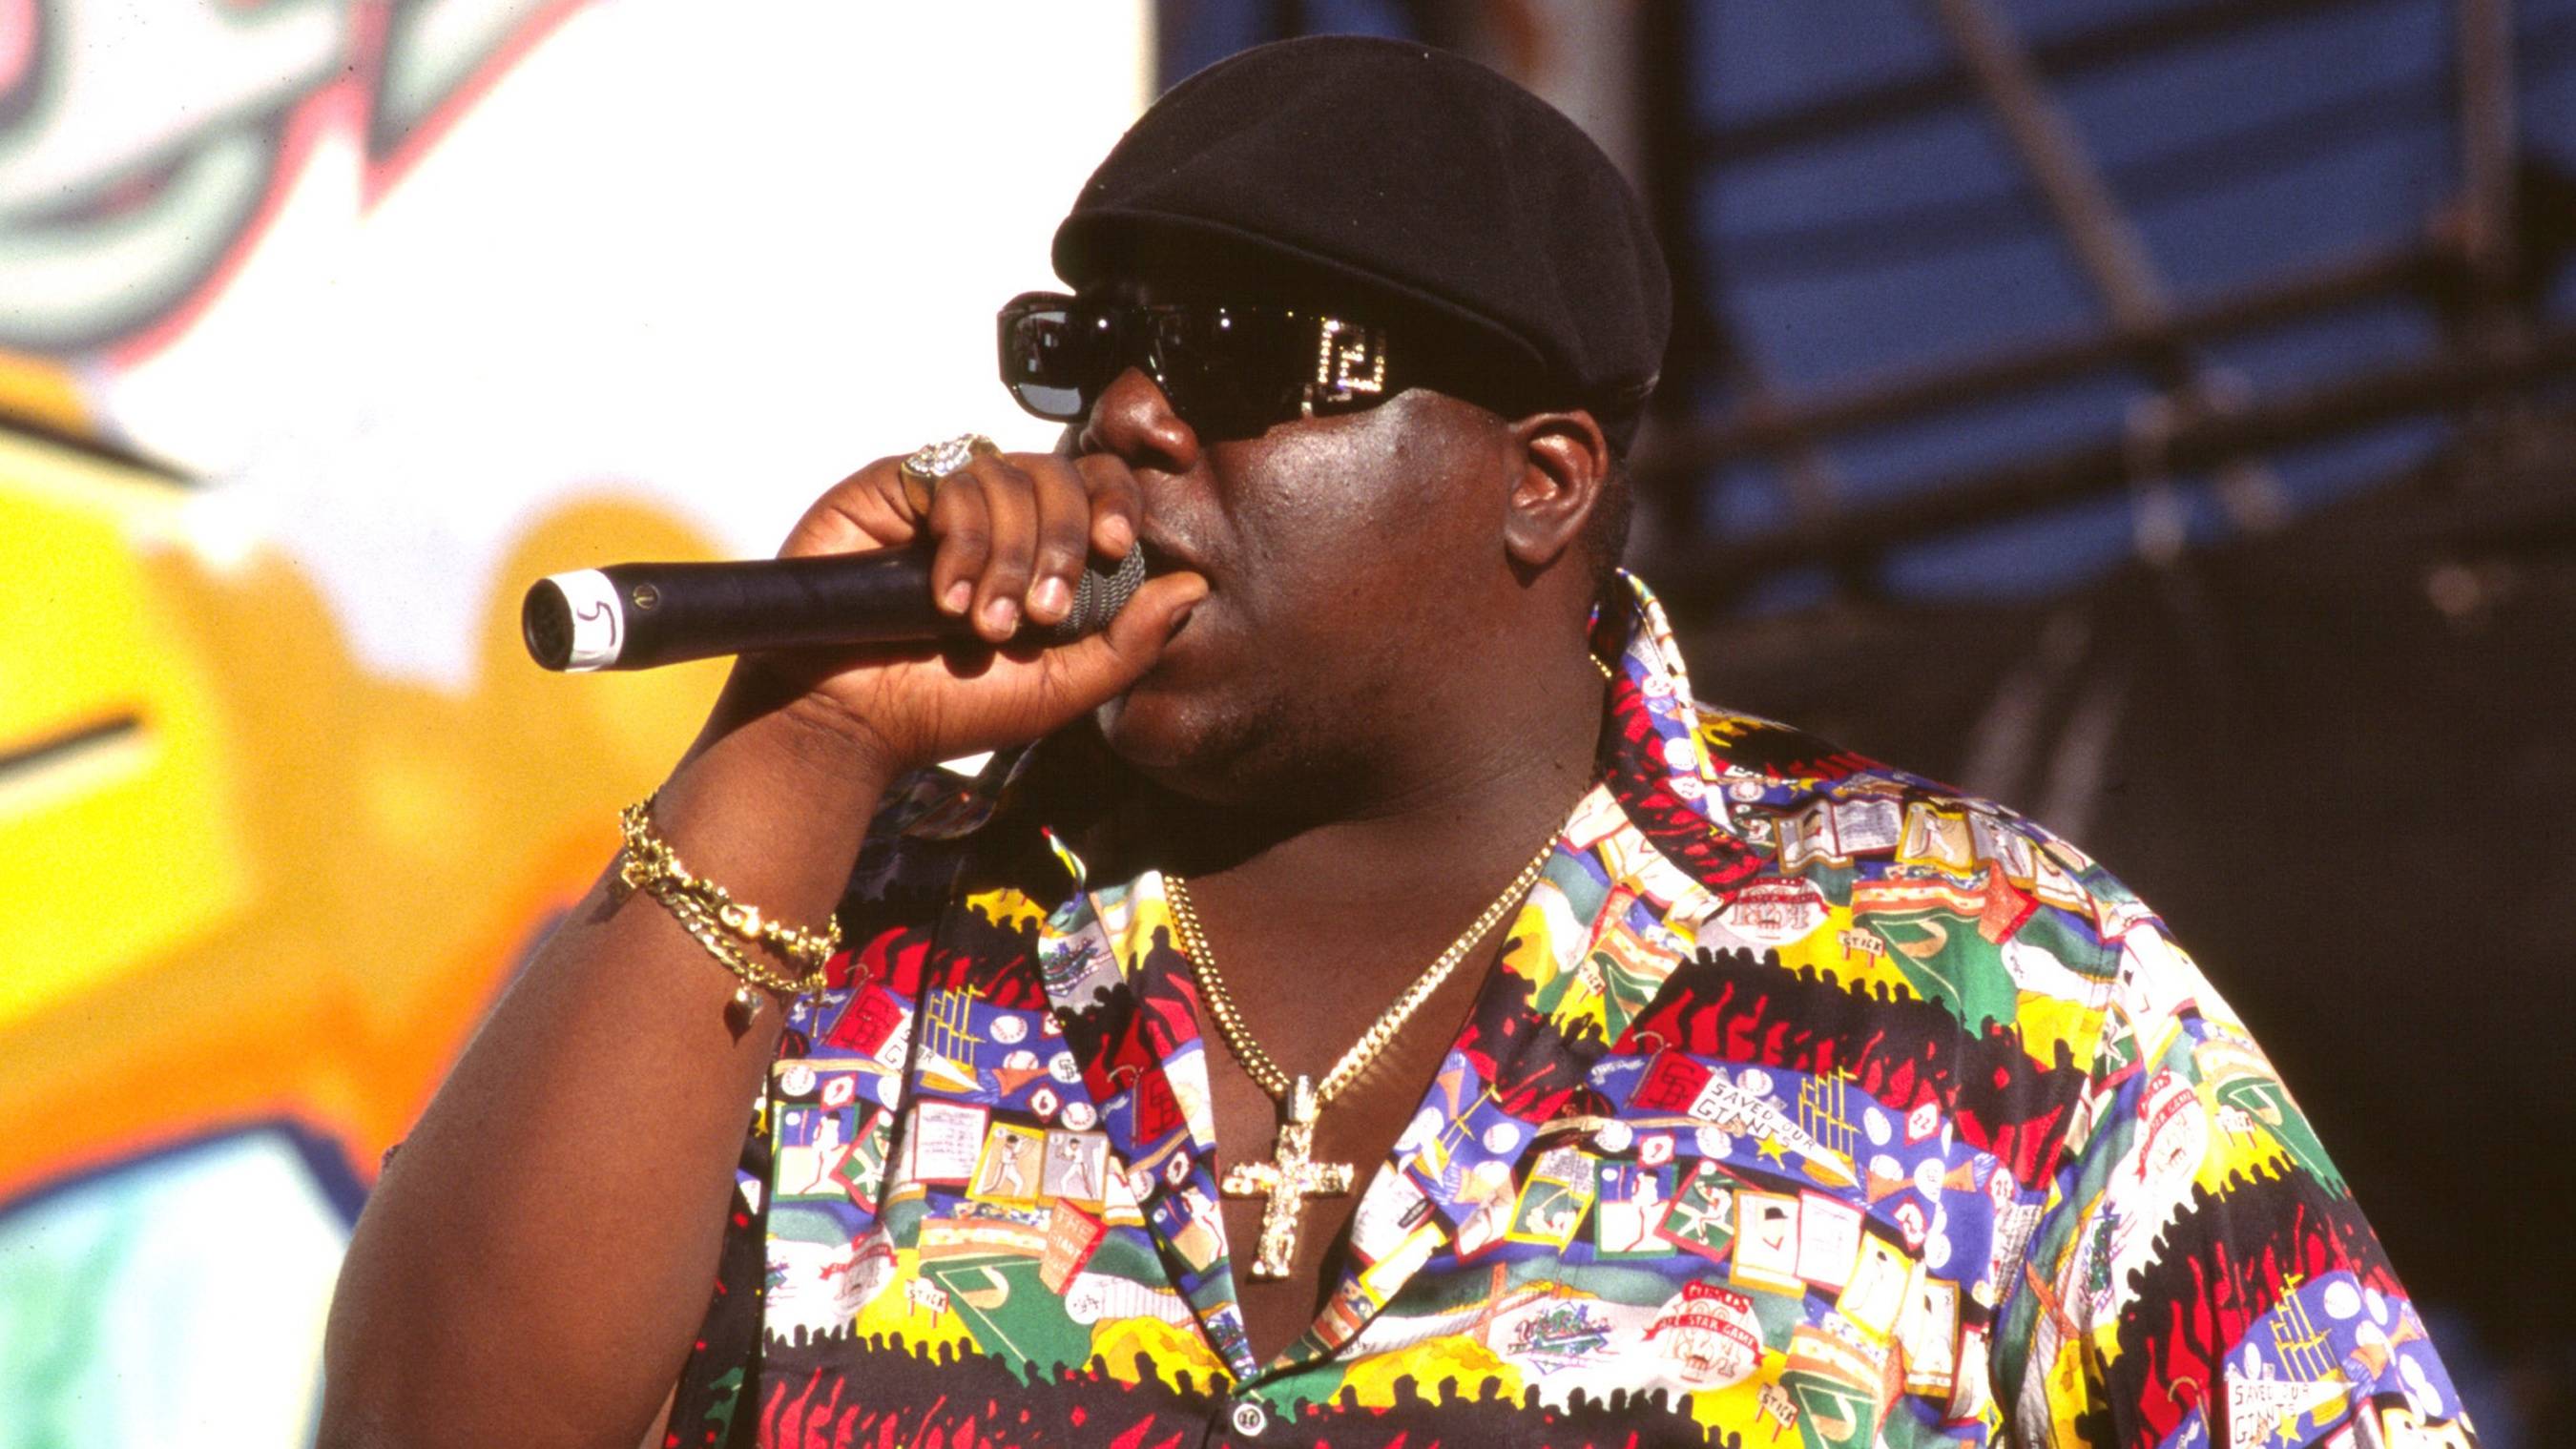 The Notorious B.I.G. (@thenotoriousbig) • Instagram photos and videos